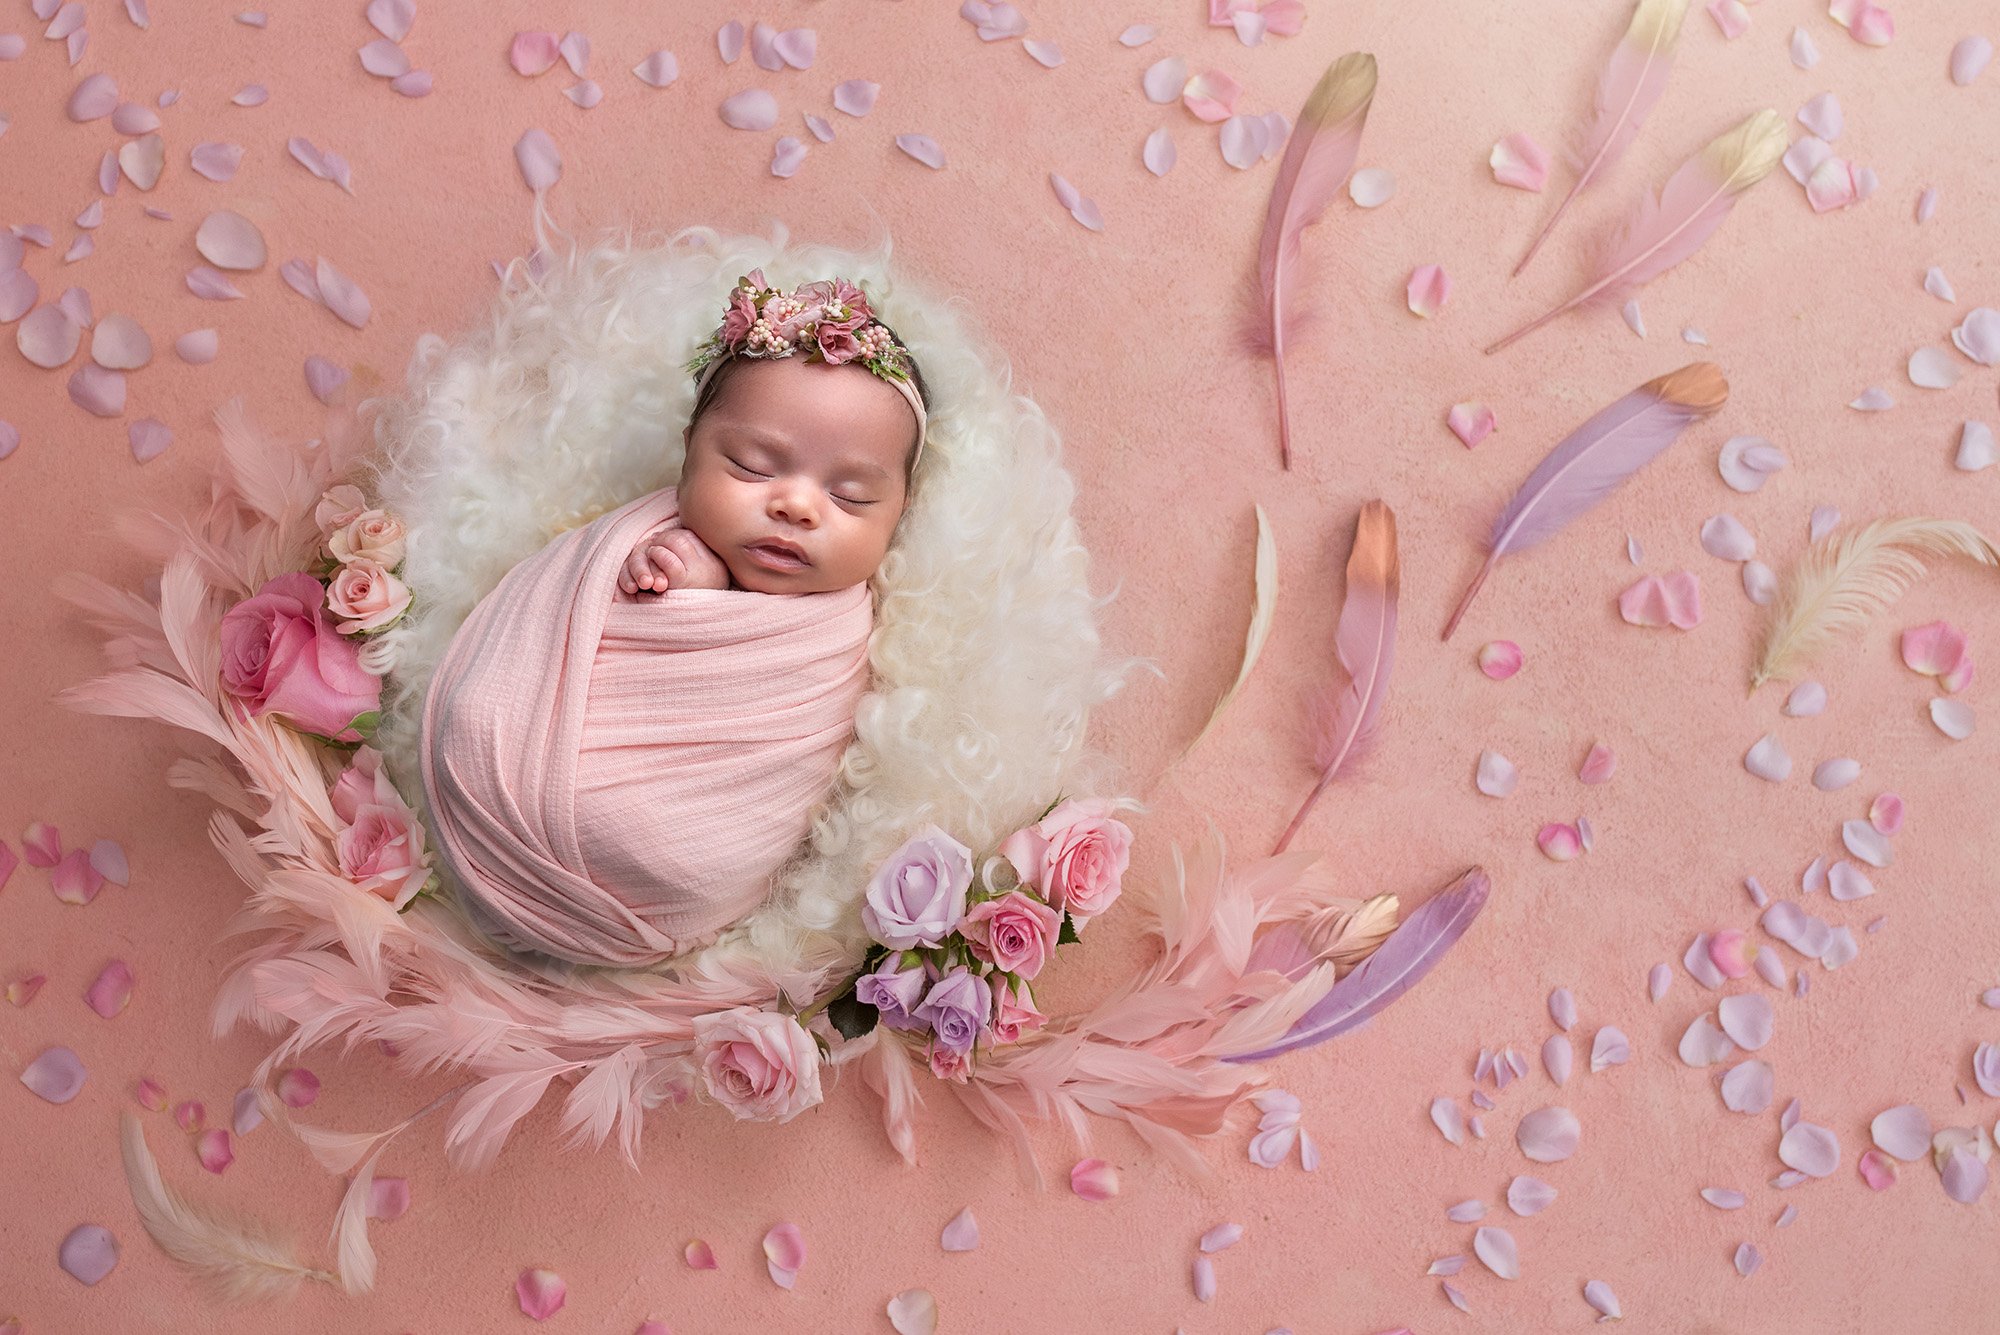 girly girl newborn photos newborn baby girl swaddled in pink sleeping on fuzzy blanket surrounded by feathers and flower petals